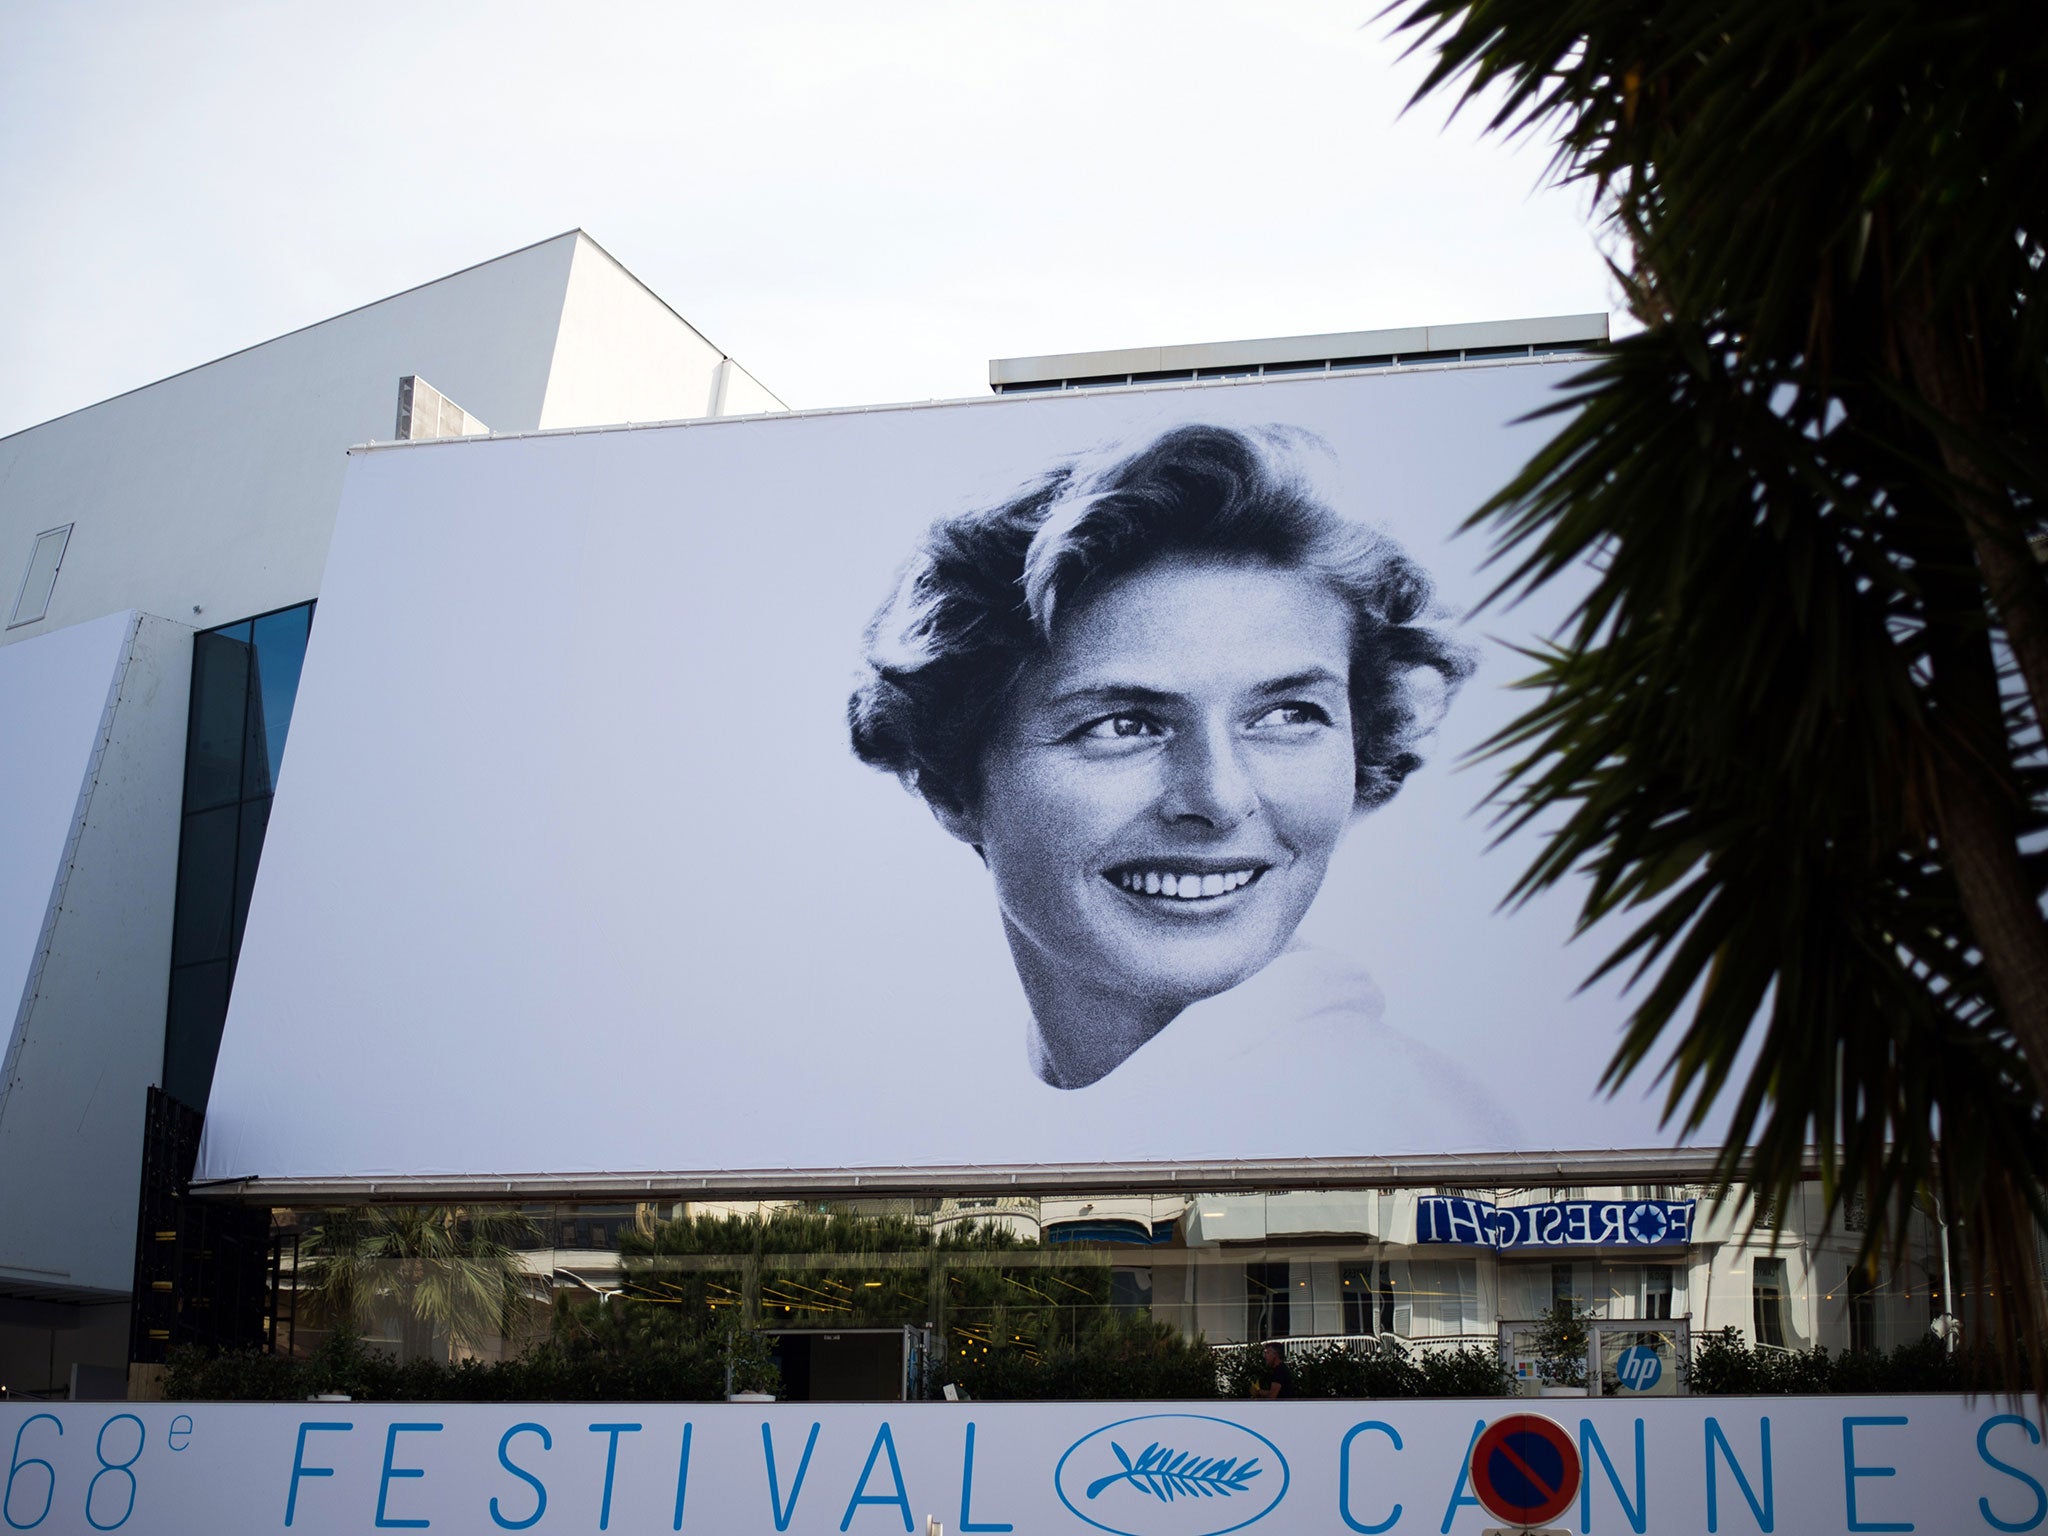 Ingrid Bergman is the star of the official Cannes 2015 poster